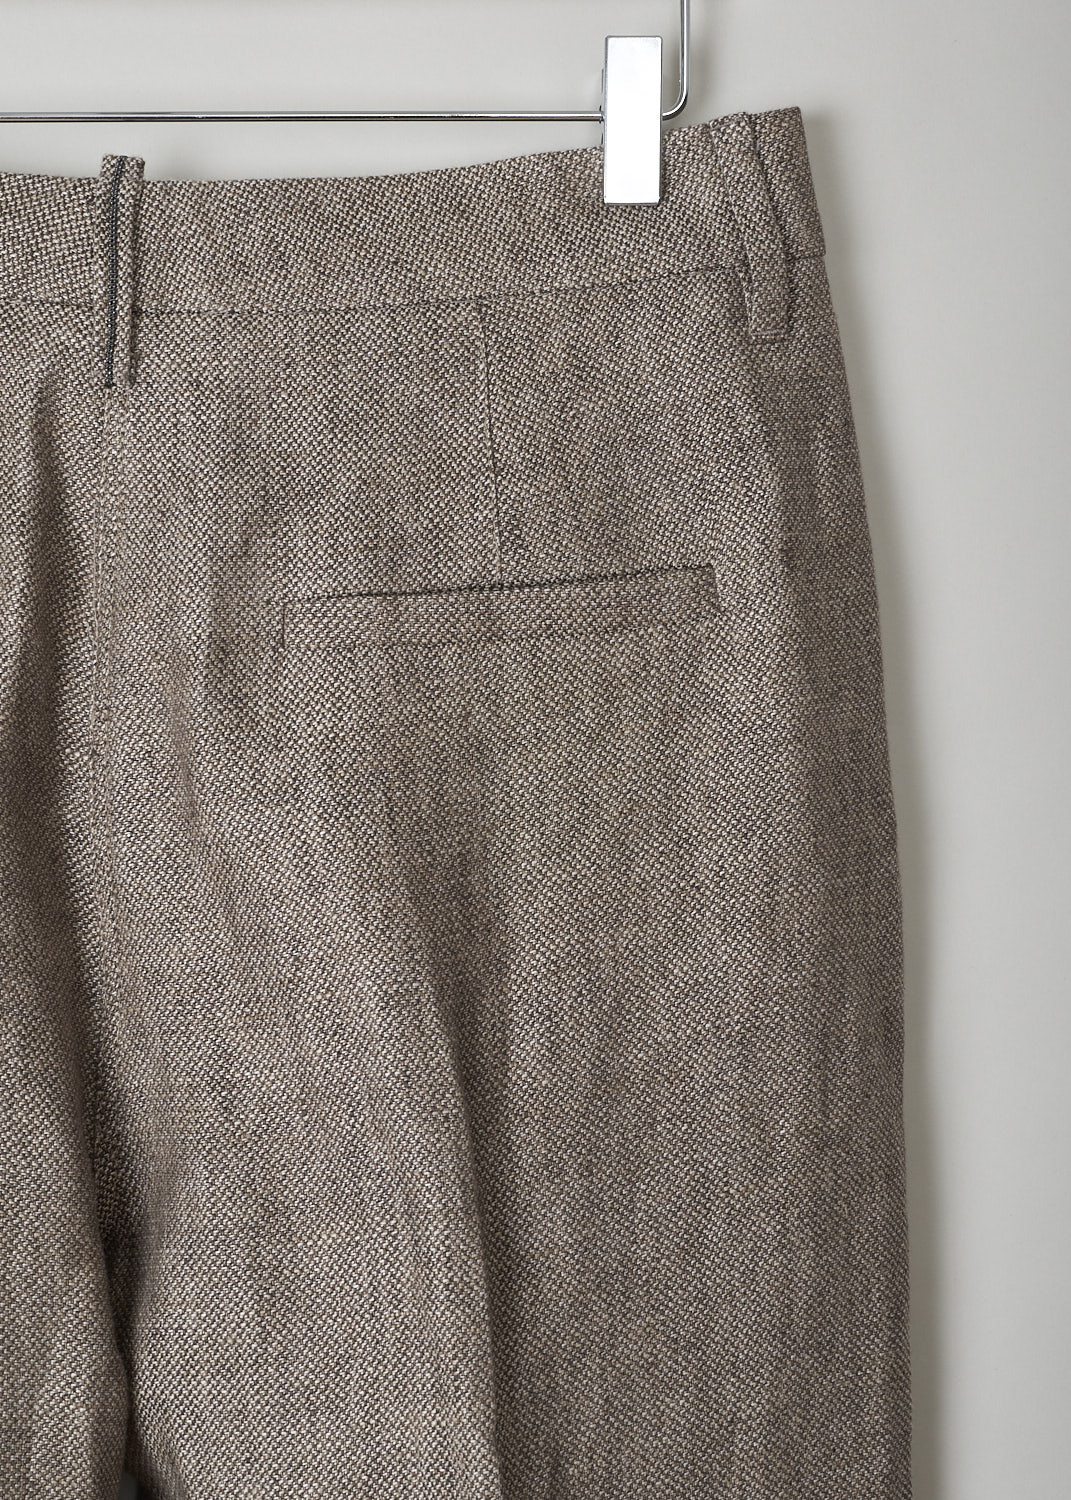 BRUNELLO CUCINELLI, BROWN LINEN PANTS, MH199P7957_C001, Beige, Brown, Detail, These brown linen pants have a waistband with belt loops. A concealed hook and zipper function as the closure option. The straight pant legs have pressed centre creases. The pants have forward slanted in the front and welt pockets in the back. 

